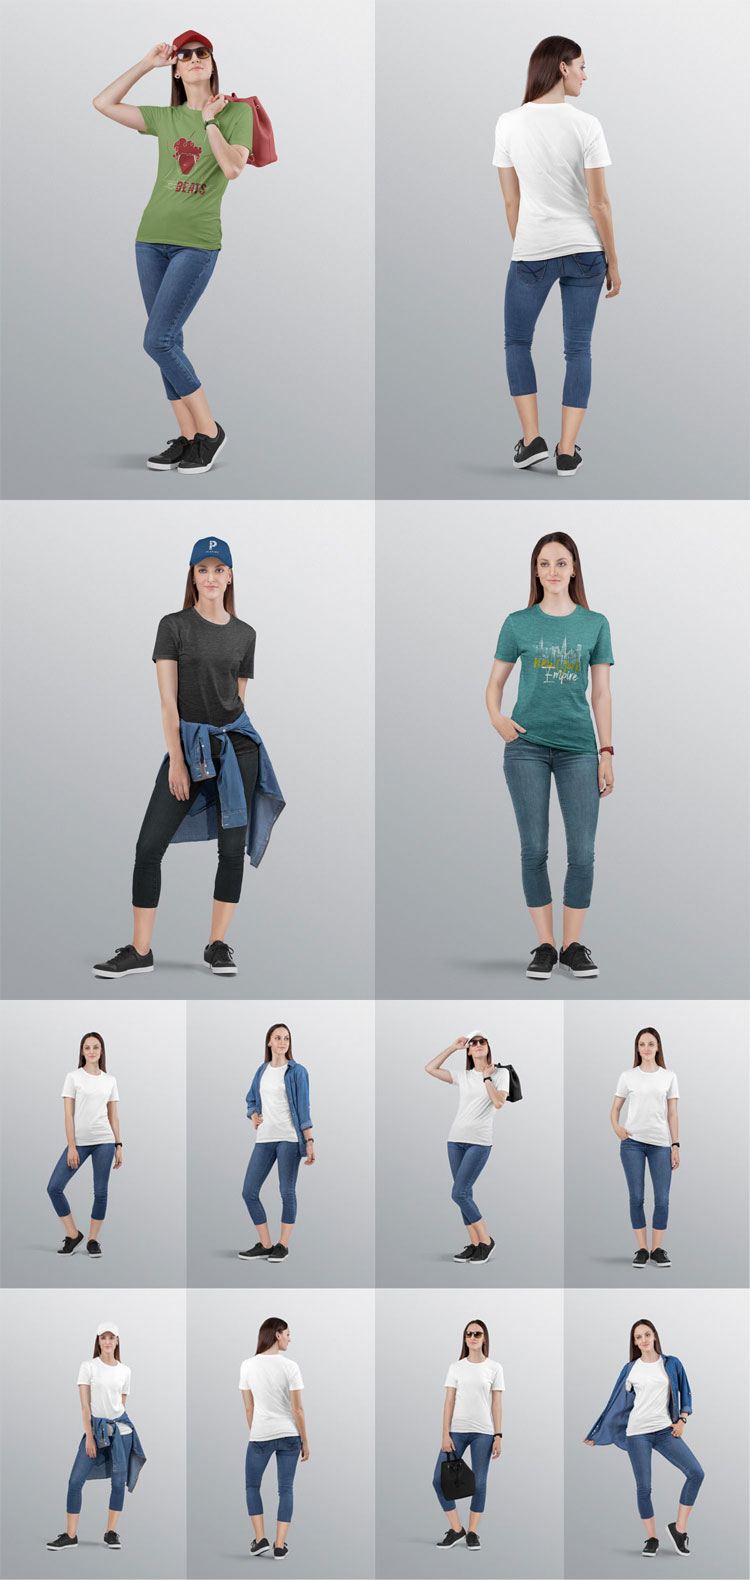 Download Women's Crew Neck T-Shirt Mockup - Set of 8 - Find the ...